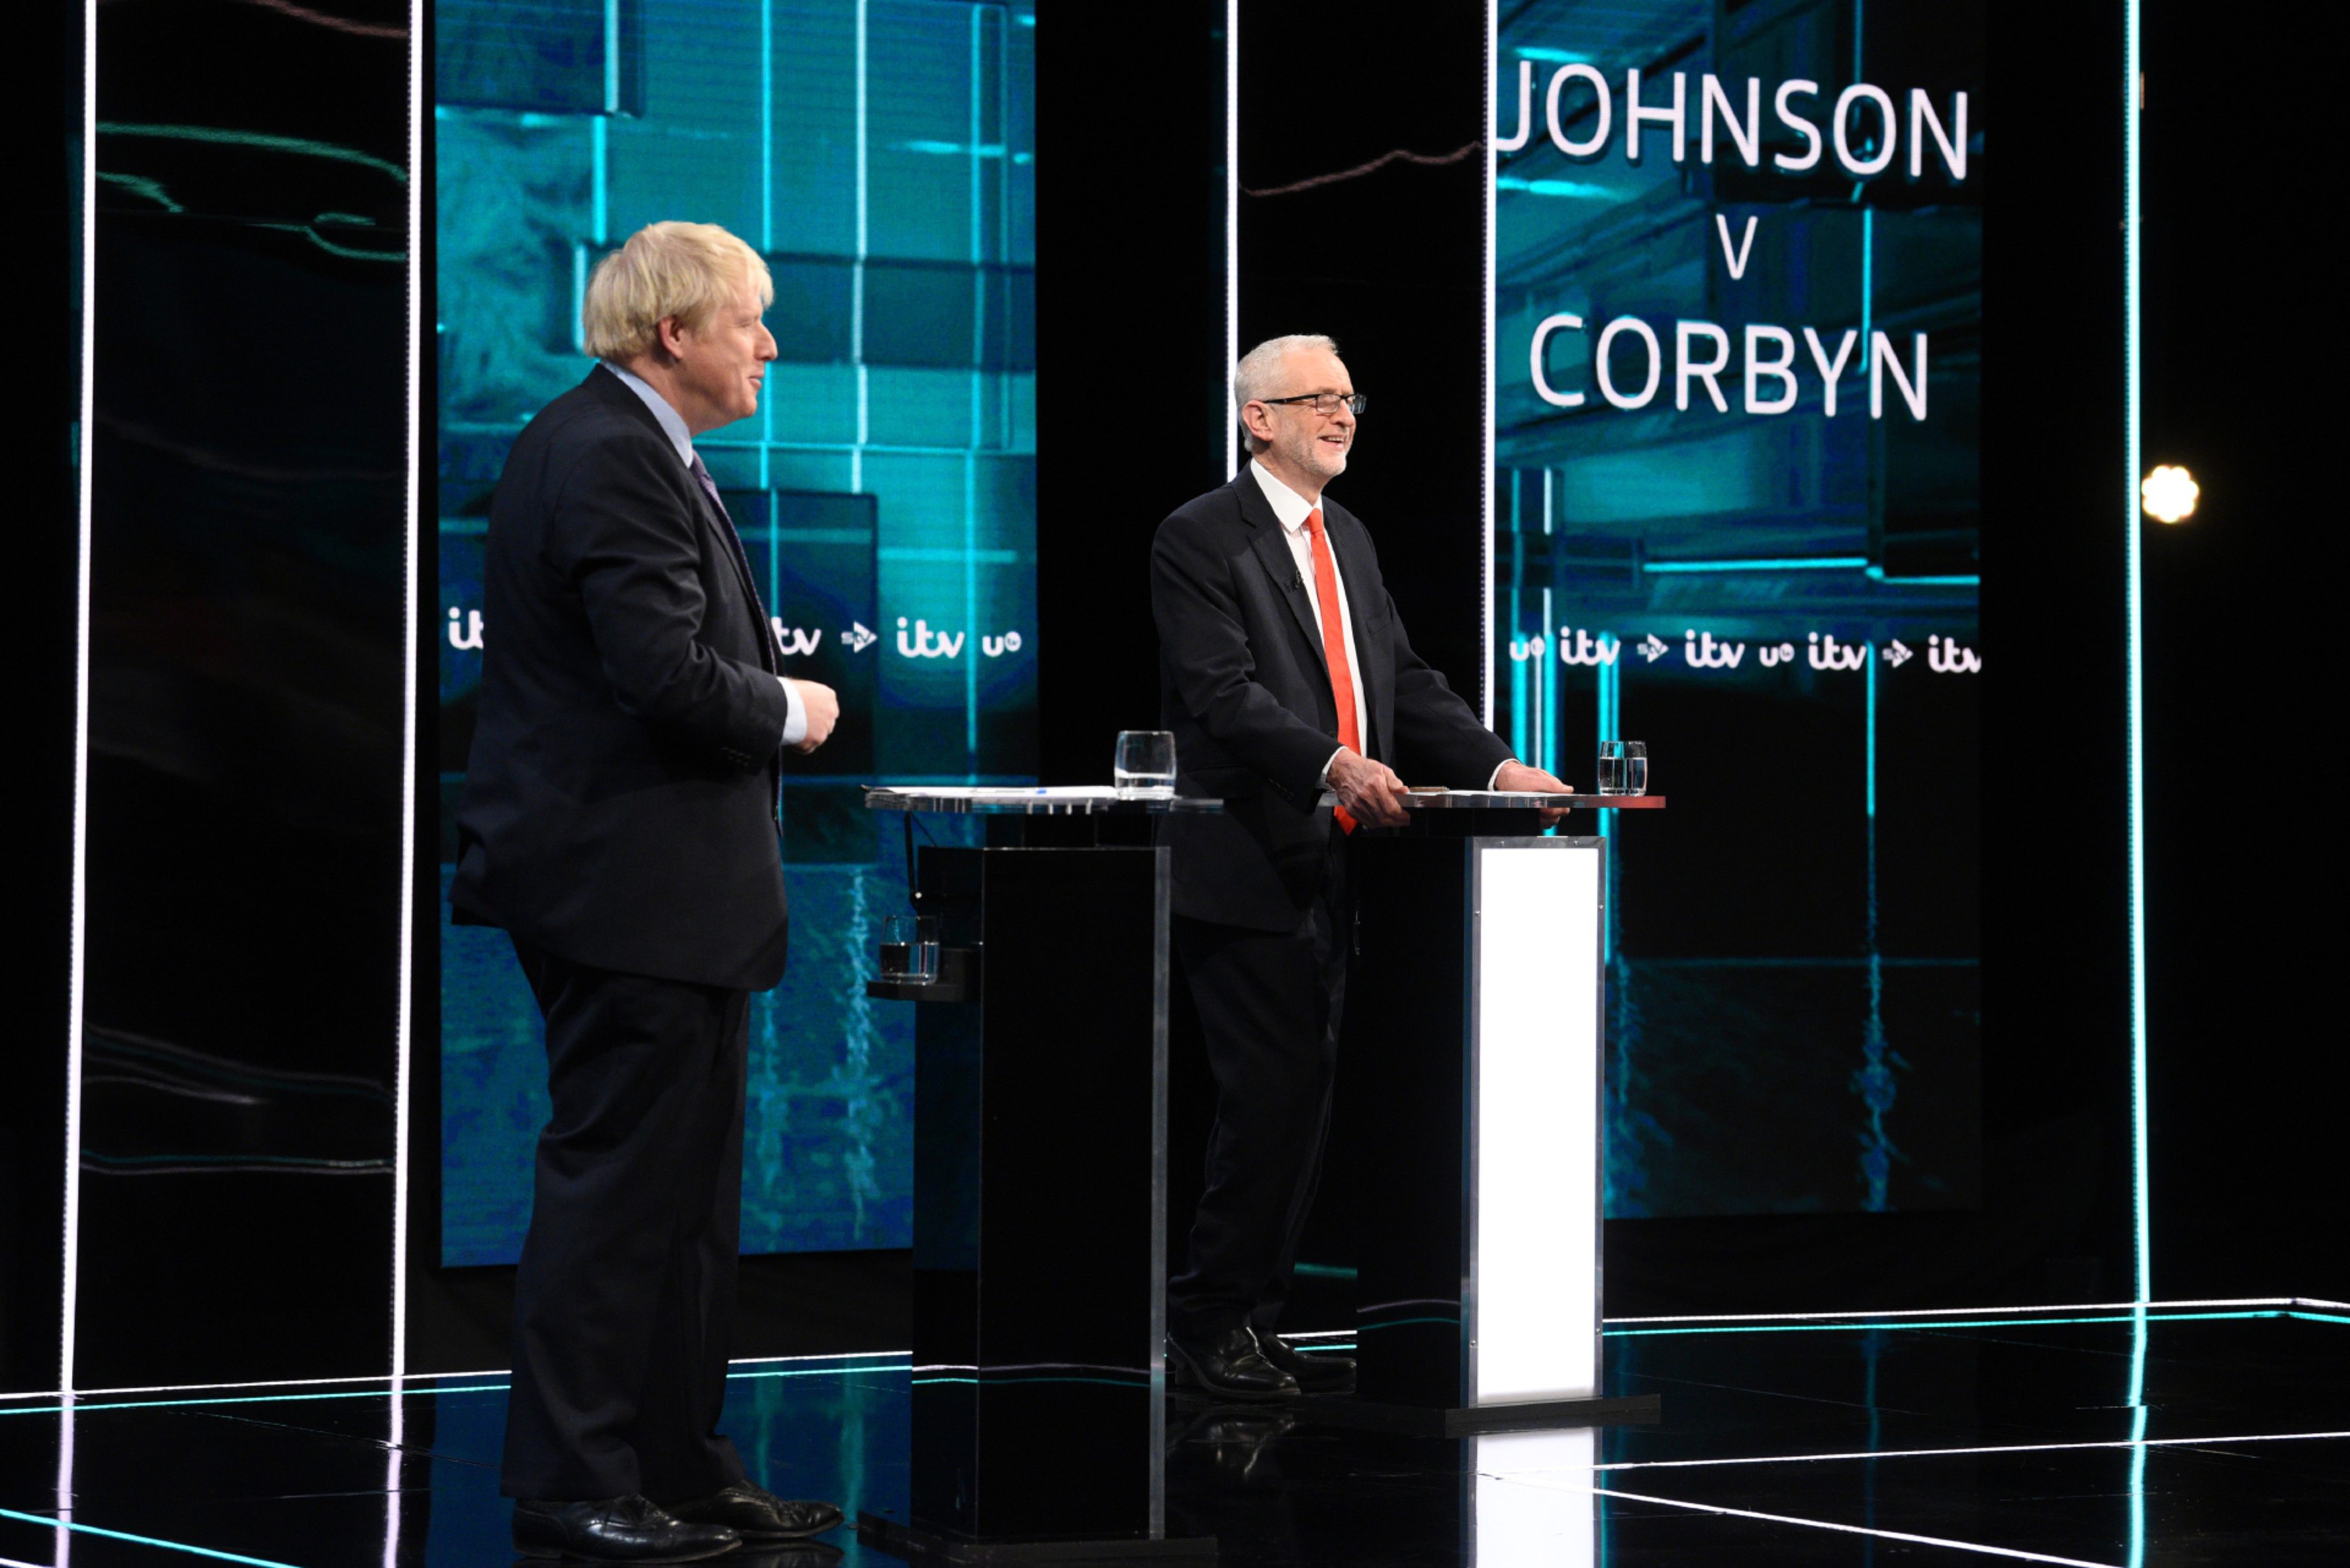 Prime Minister Boris Johnson and Leader of the Labour Party Jeremy Corbyn answer questions during the ITV Leaders Debate at Media Centre on November 19, 2019